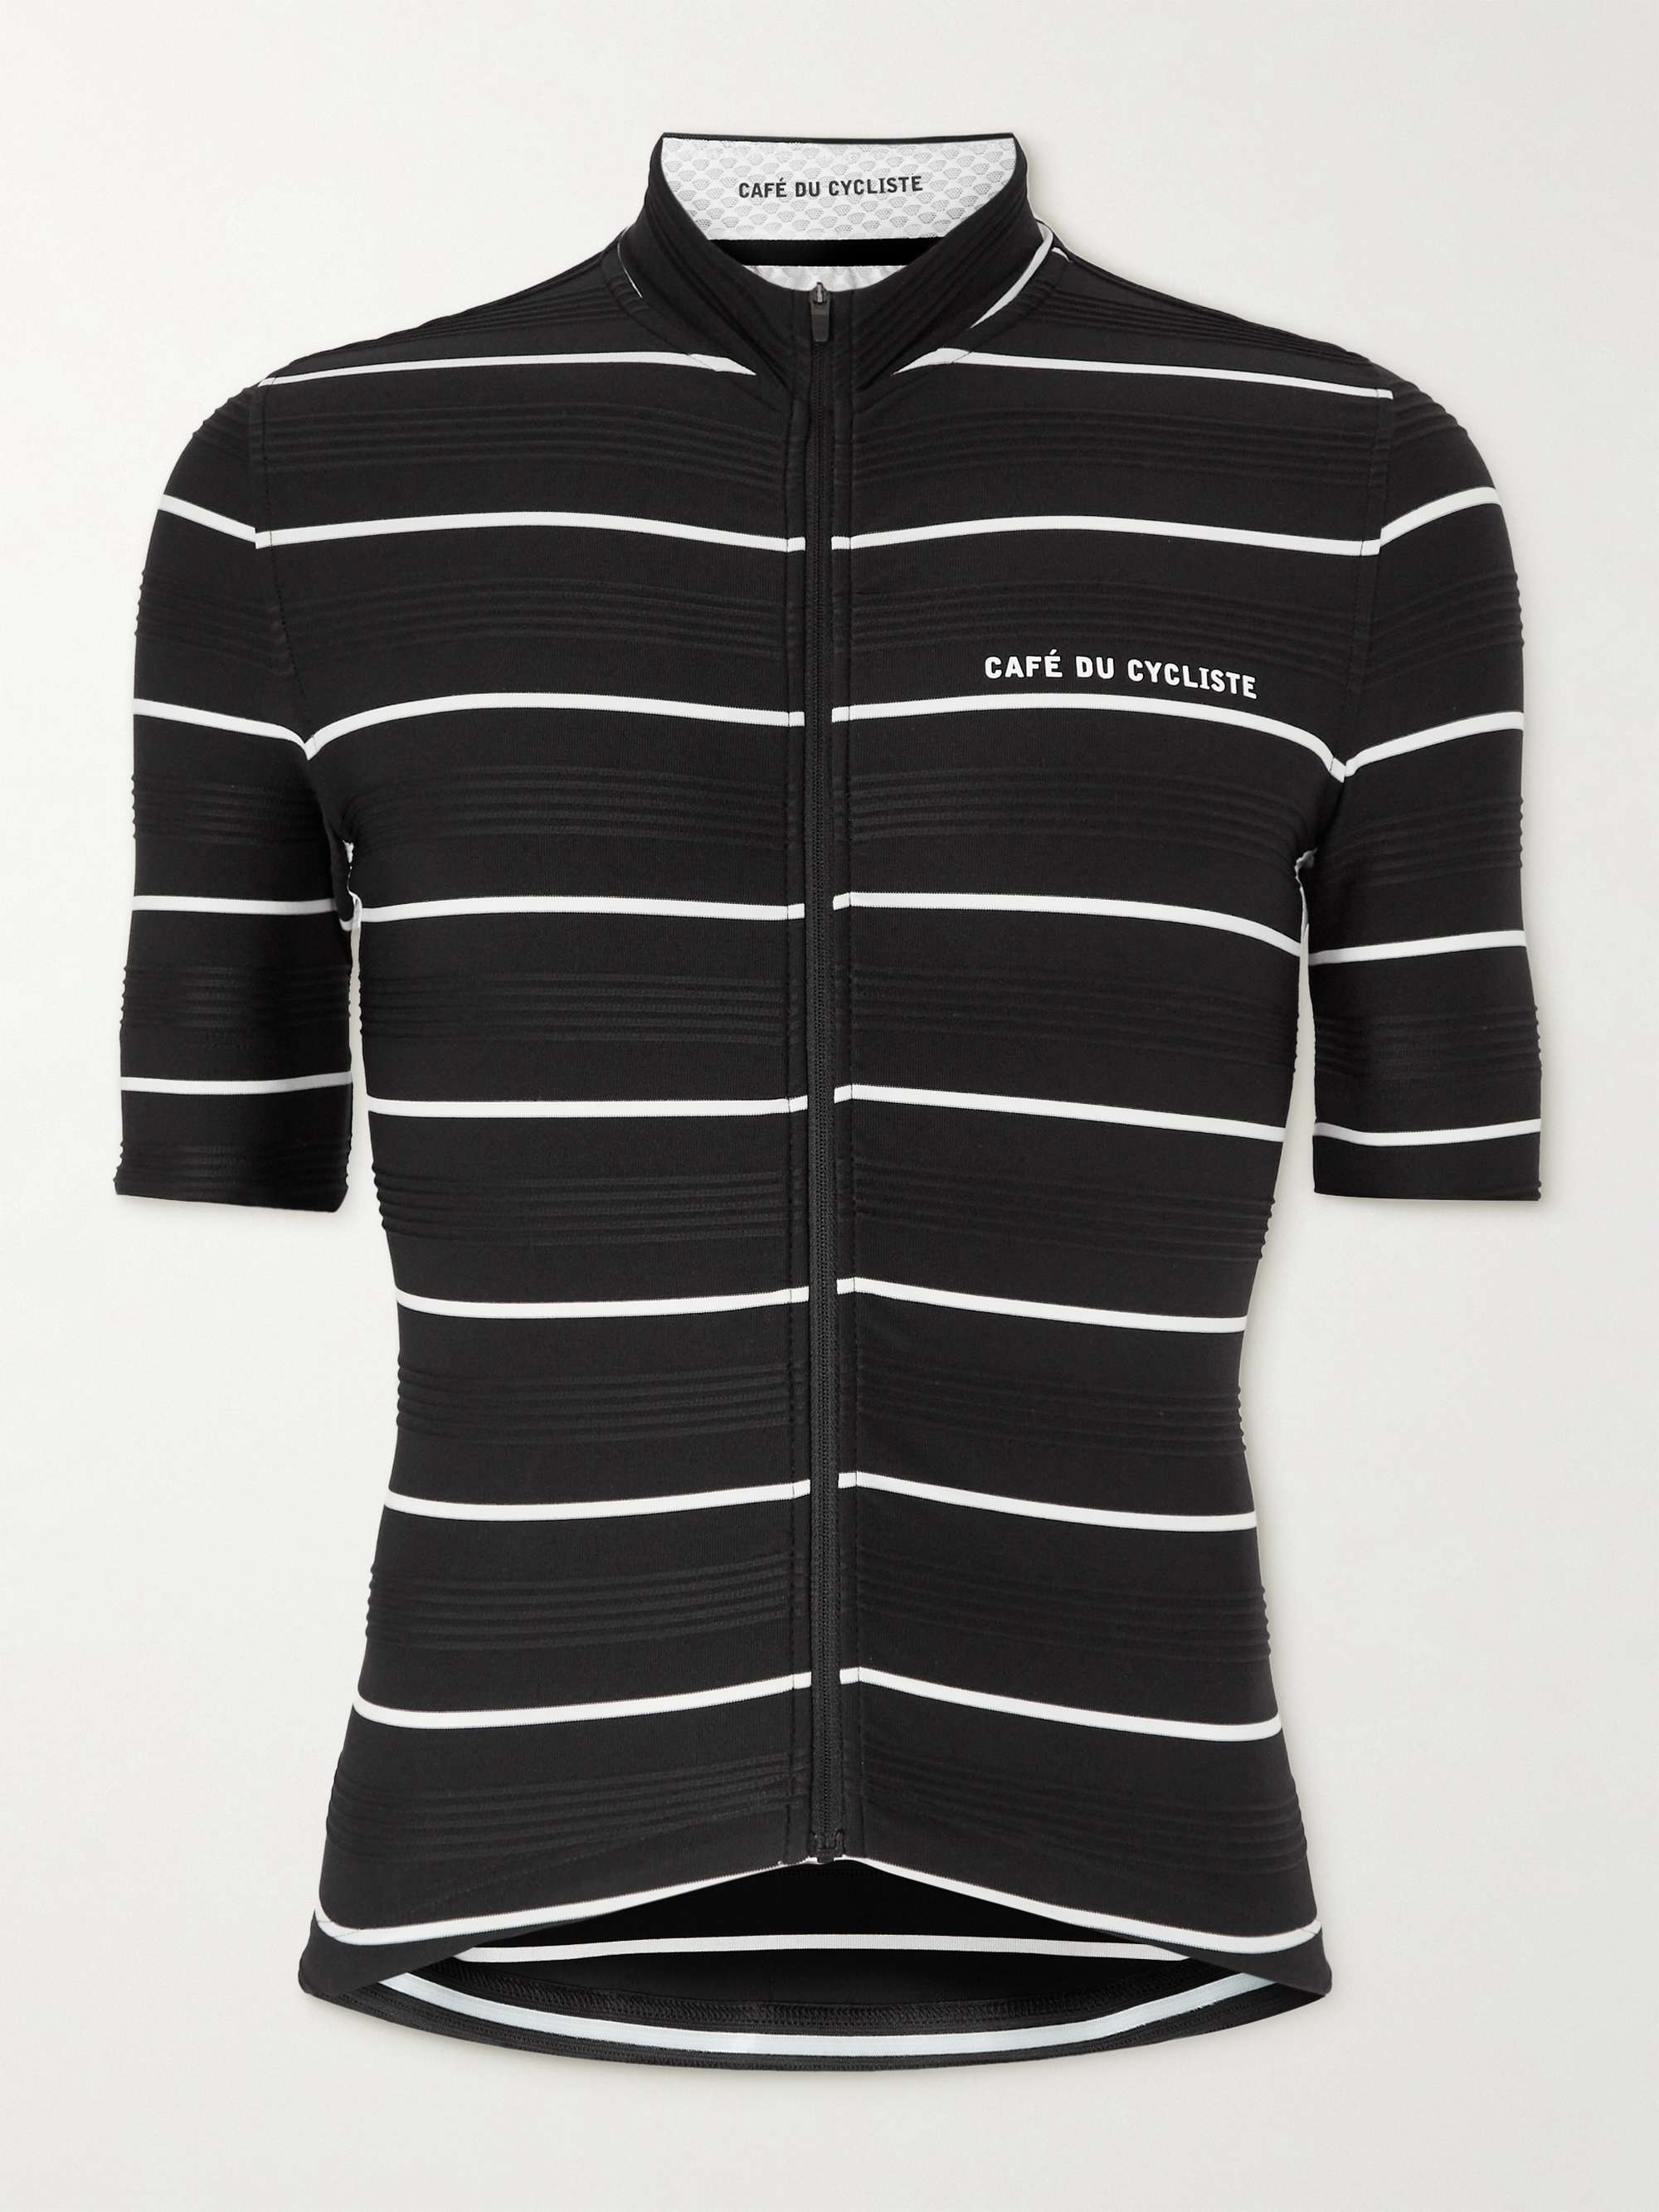 CAFE DU CYCLISTE Francine Striped Mesh-Panelled Cycling Jersey